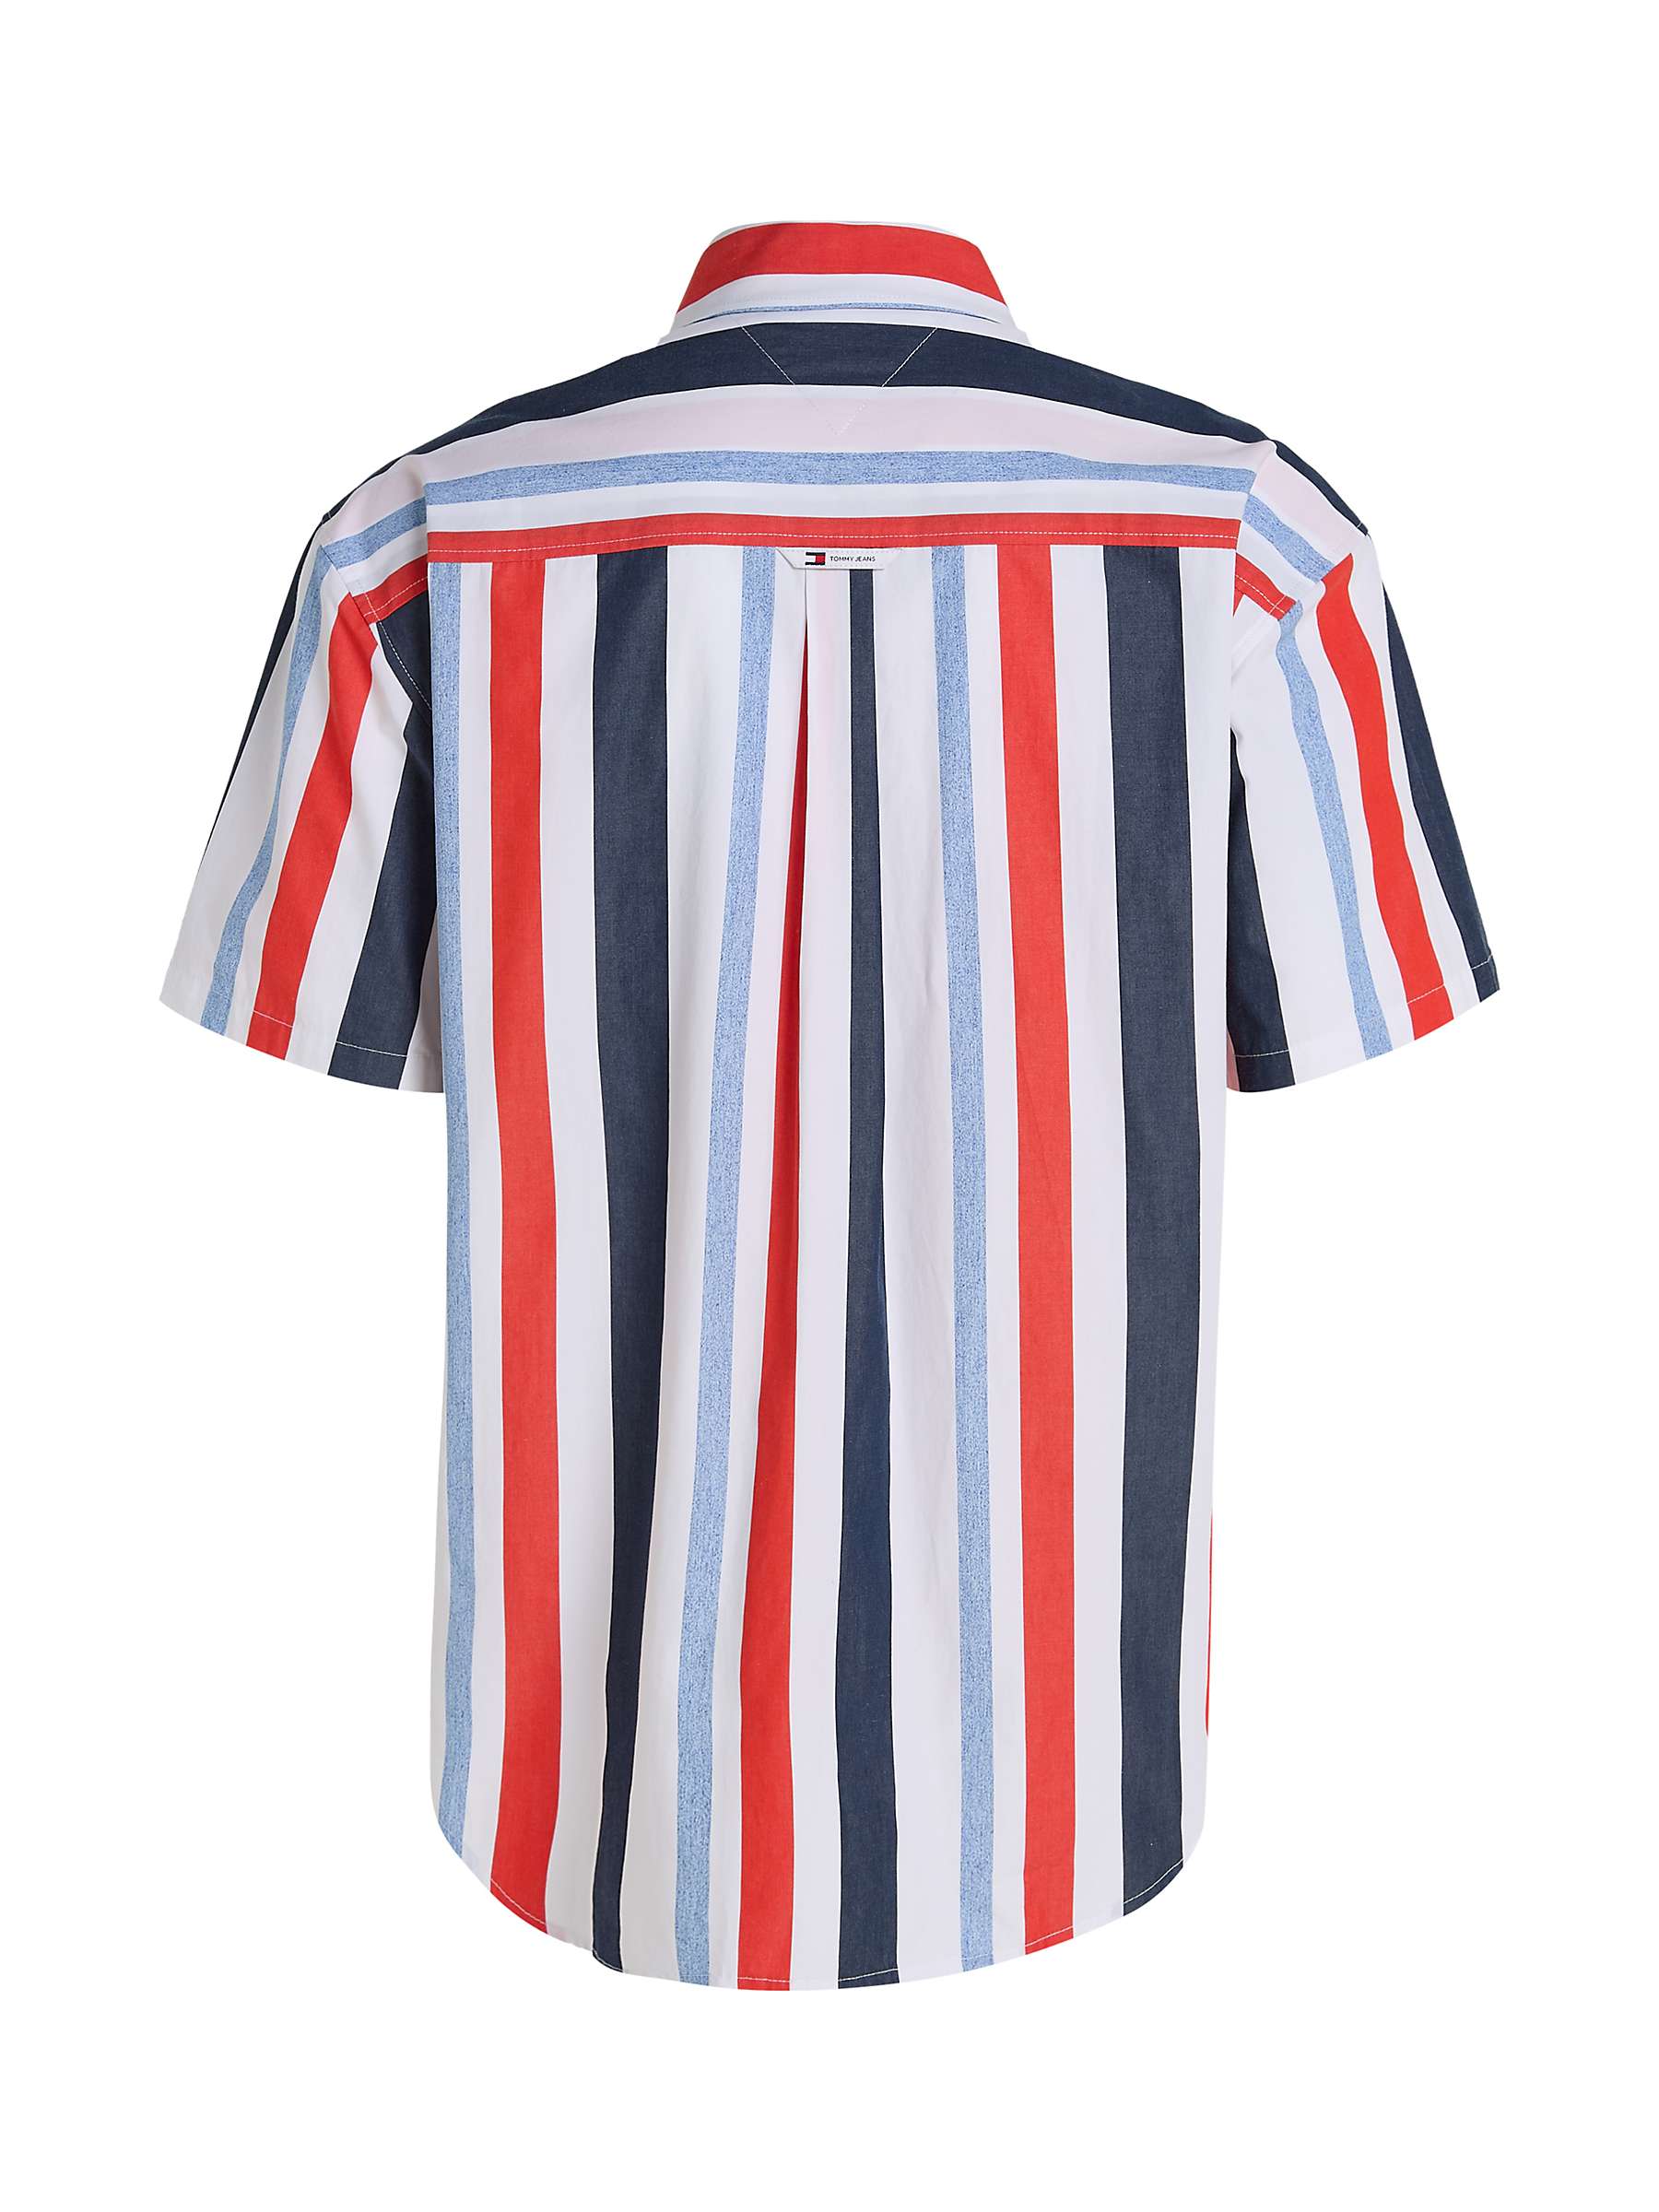 Buy Tommy Jeans Relaxed Stripe T-Shirt, Multi Online at johnlewis.com